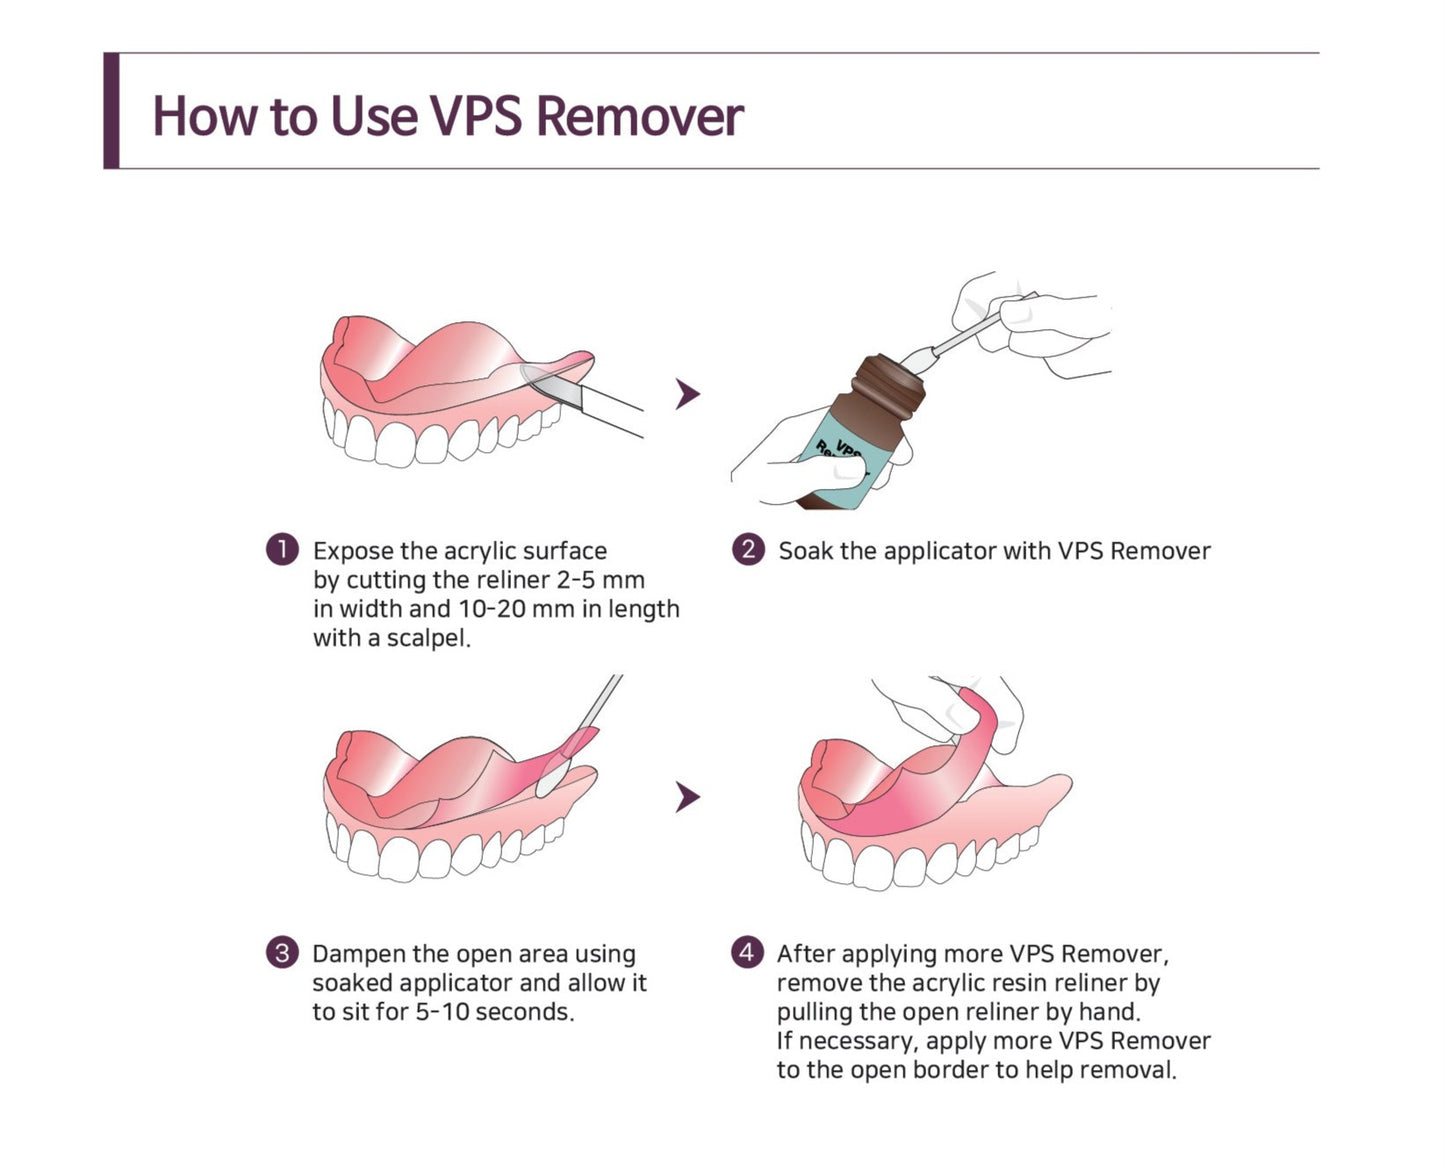 VPS Remover